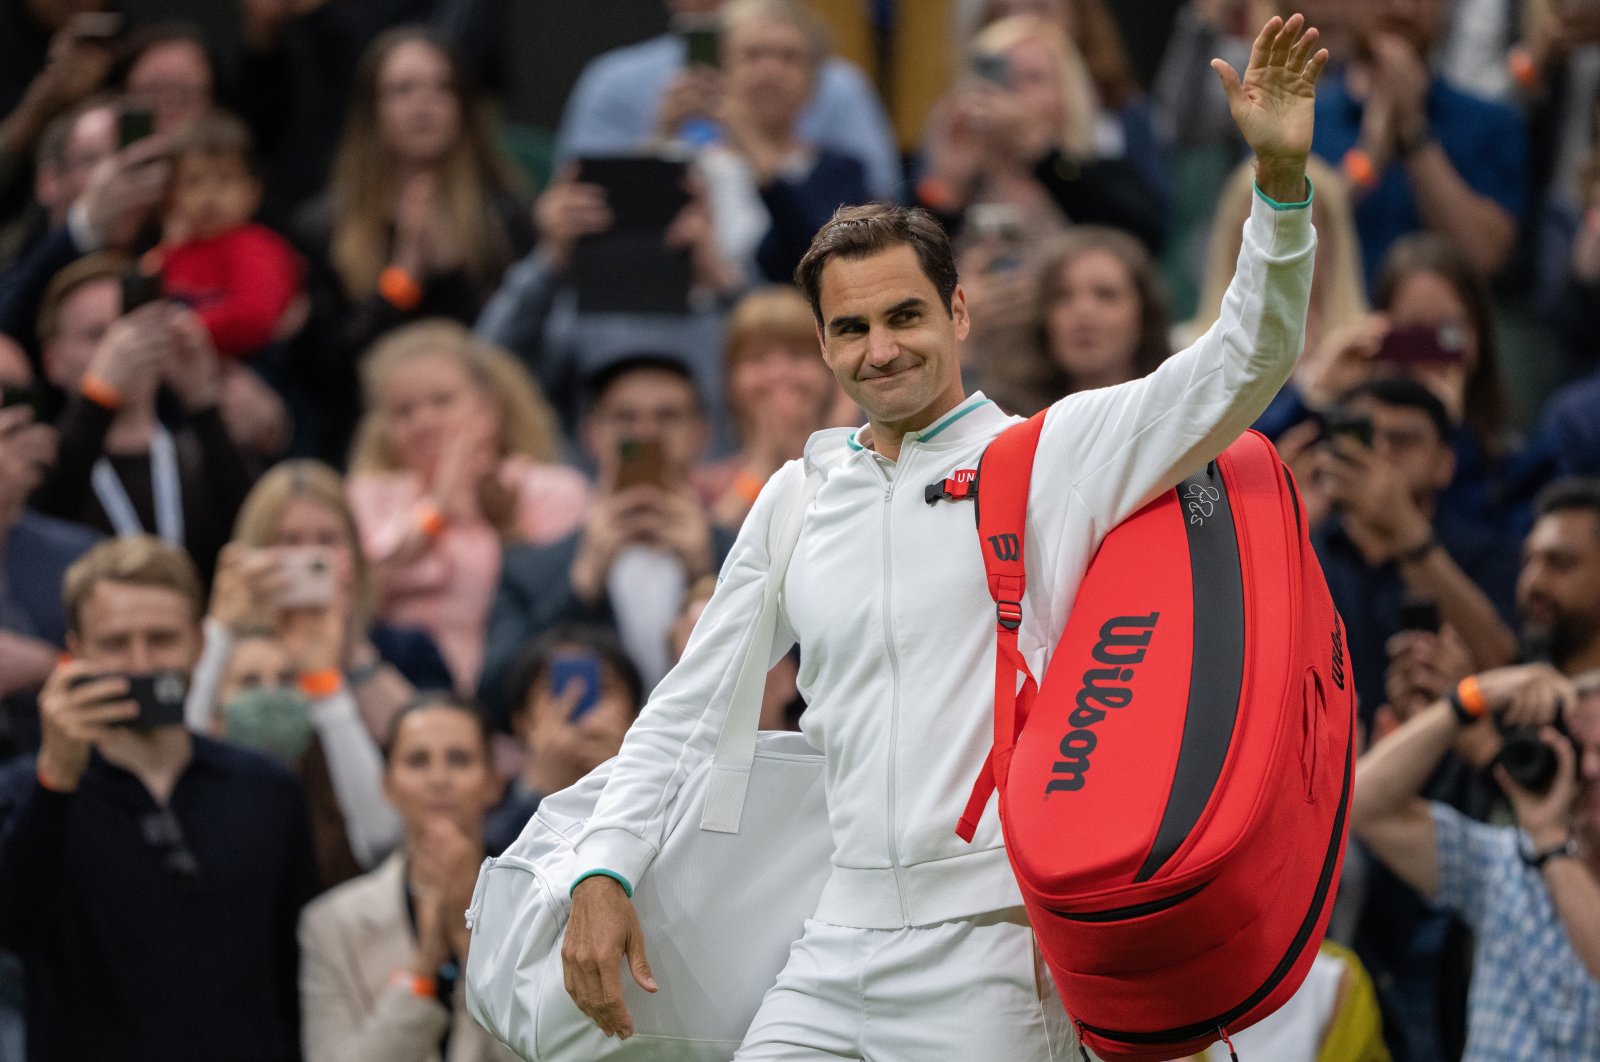 Switzerland's Roger Federer leaves court after winning his first round match against Fance's Adrian Mannarino at All England Lawn Tennis and Croquet Club, London, Britain, June 29, 2021 (Pool via Reuters)